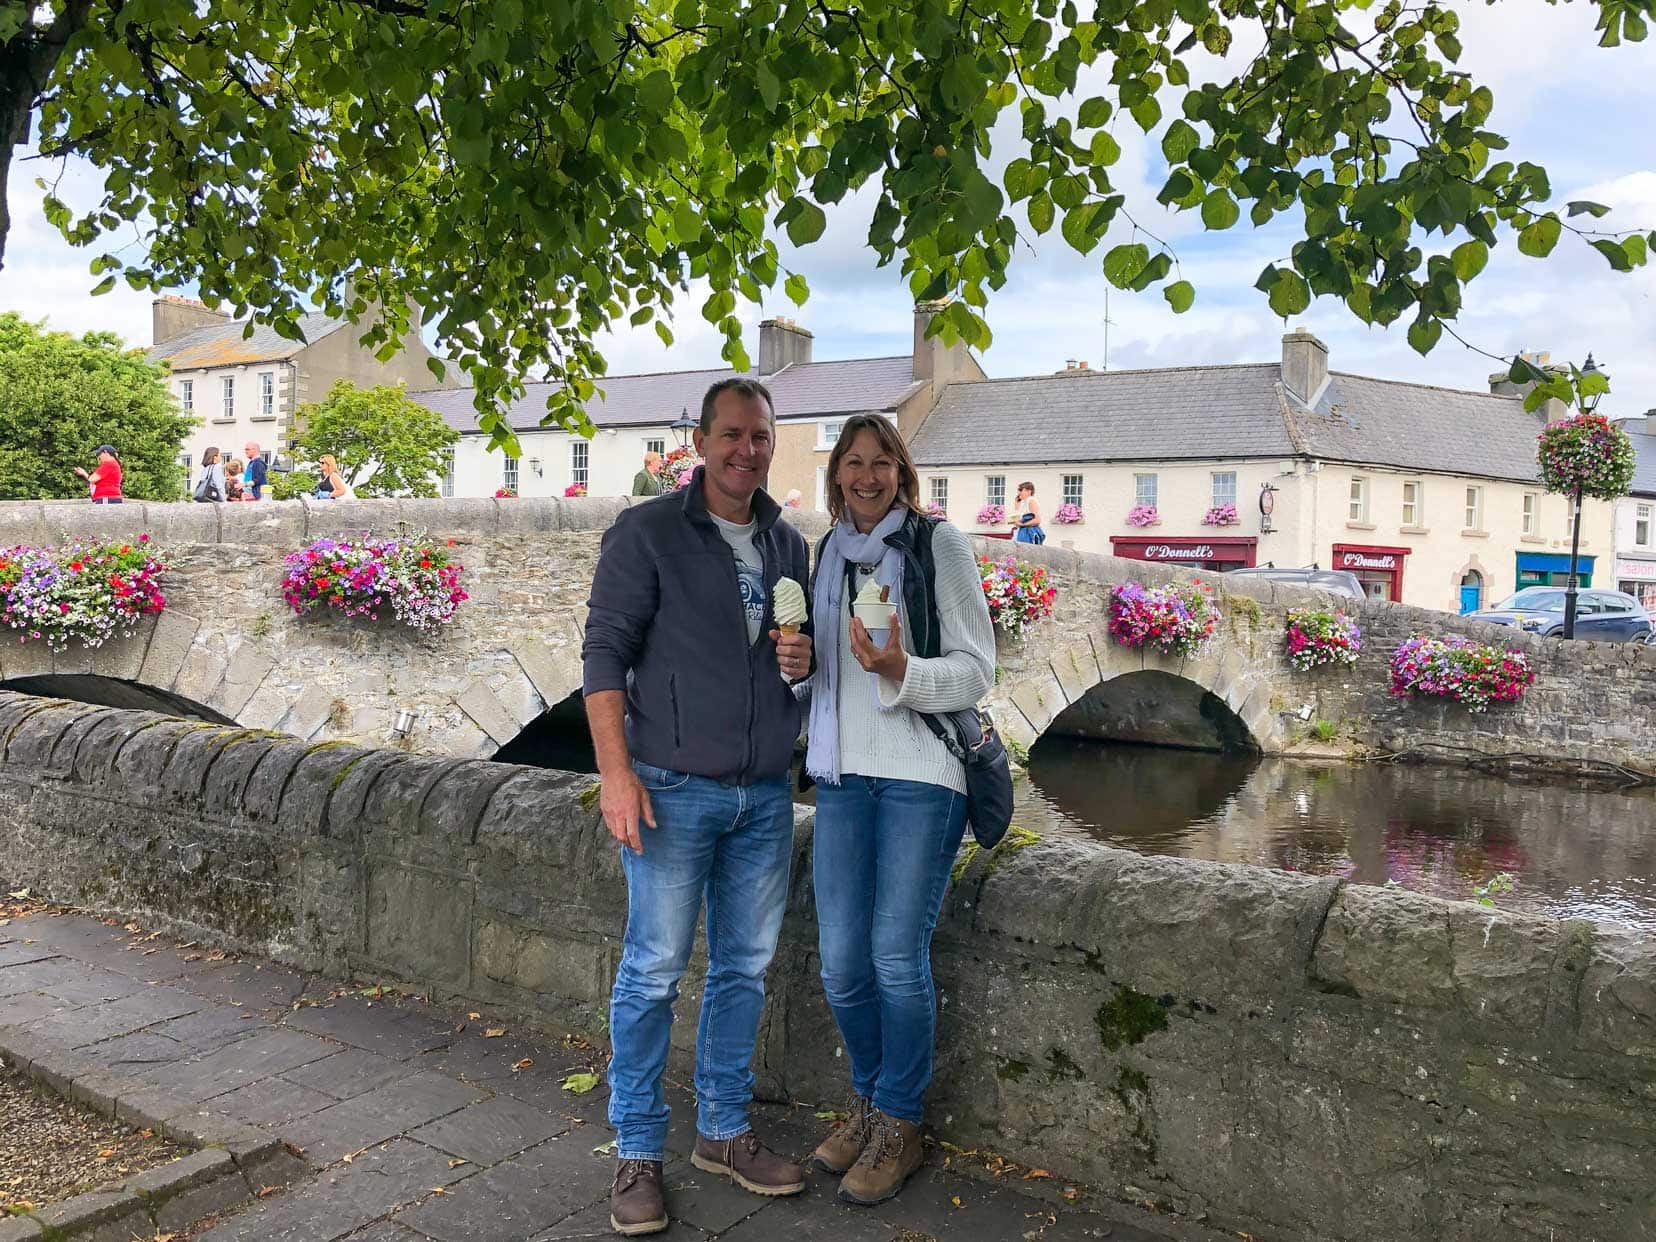 Westport-us-having-ice-cream_stood by a wall next to the river and a bridge with flower displays